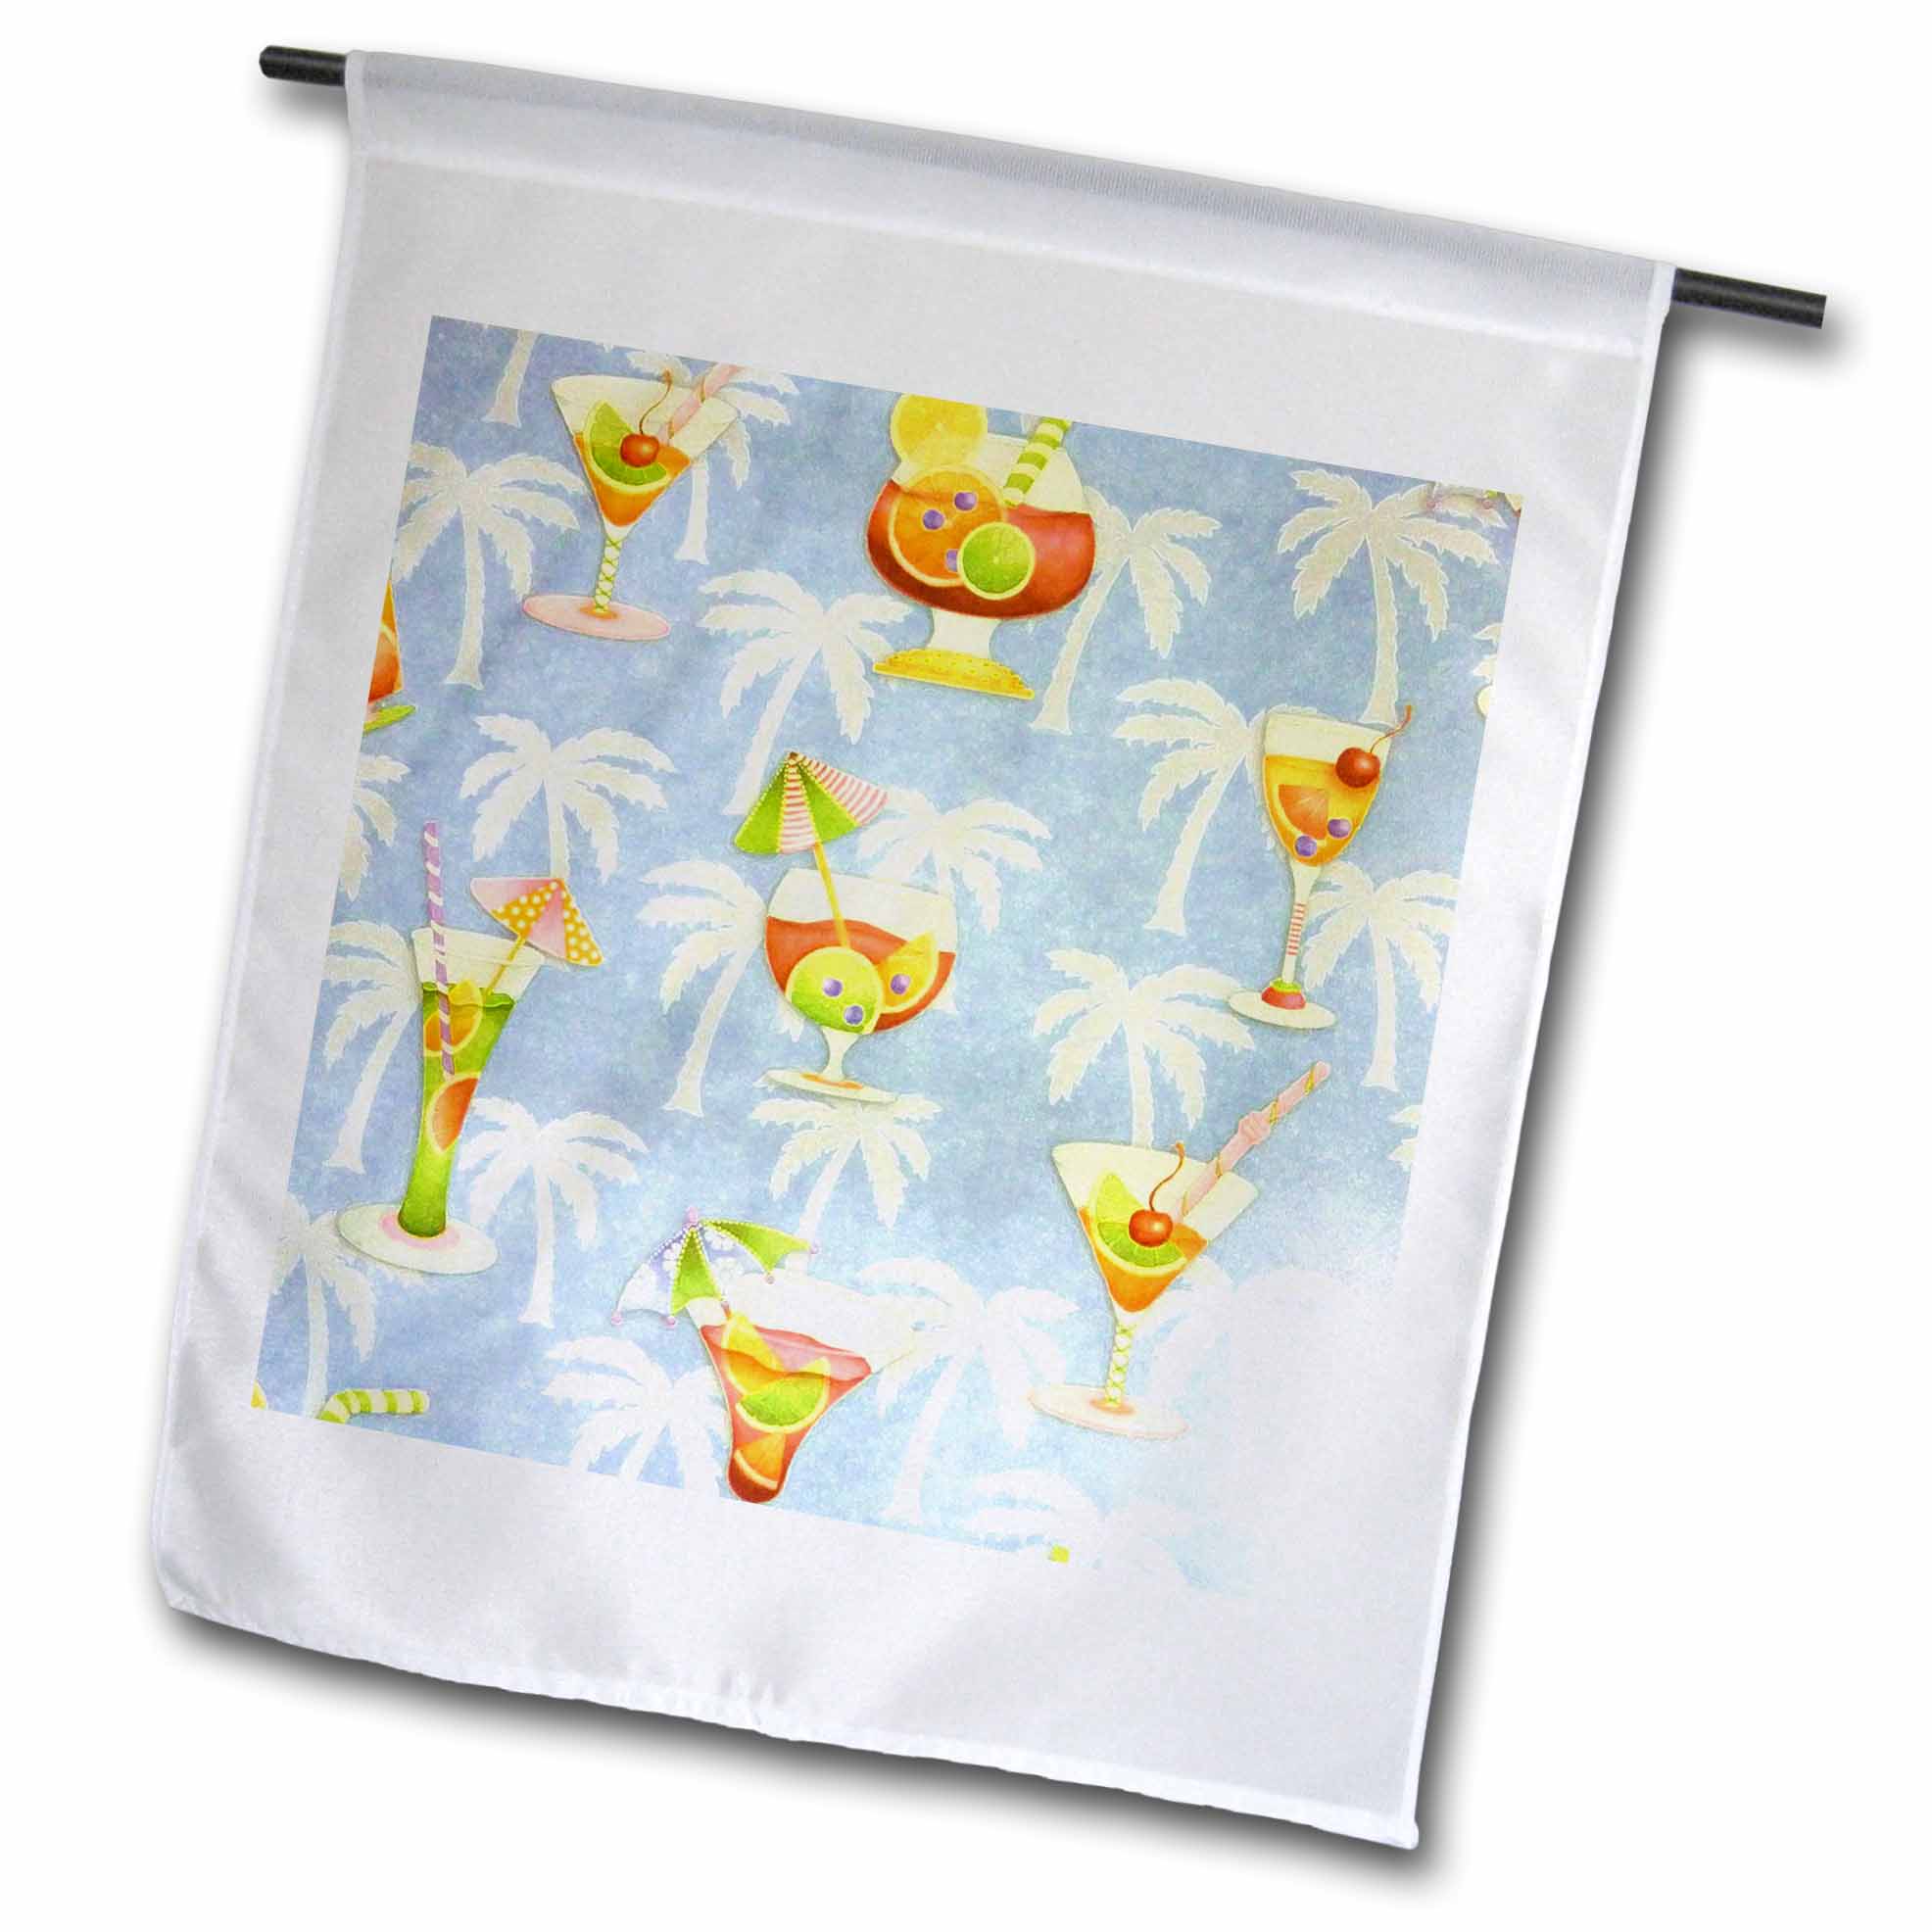 3dRose Cocktails n Palm Trees - Garden Flag, 18 by 27-inch - image 1 of 1